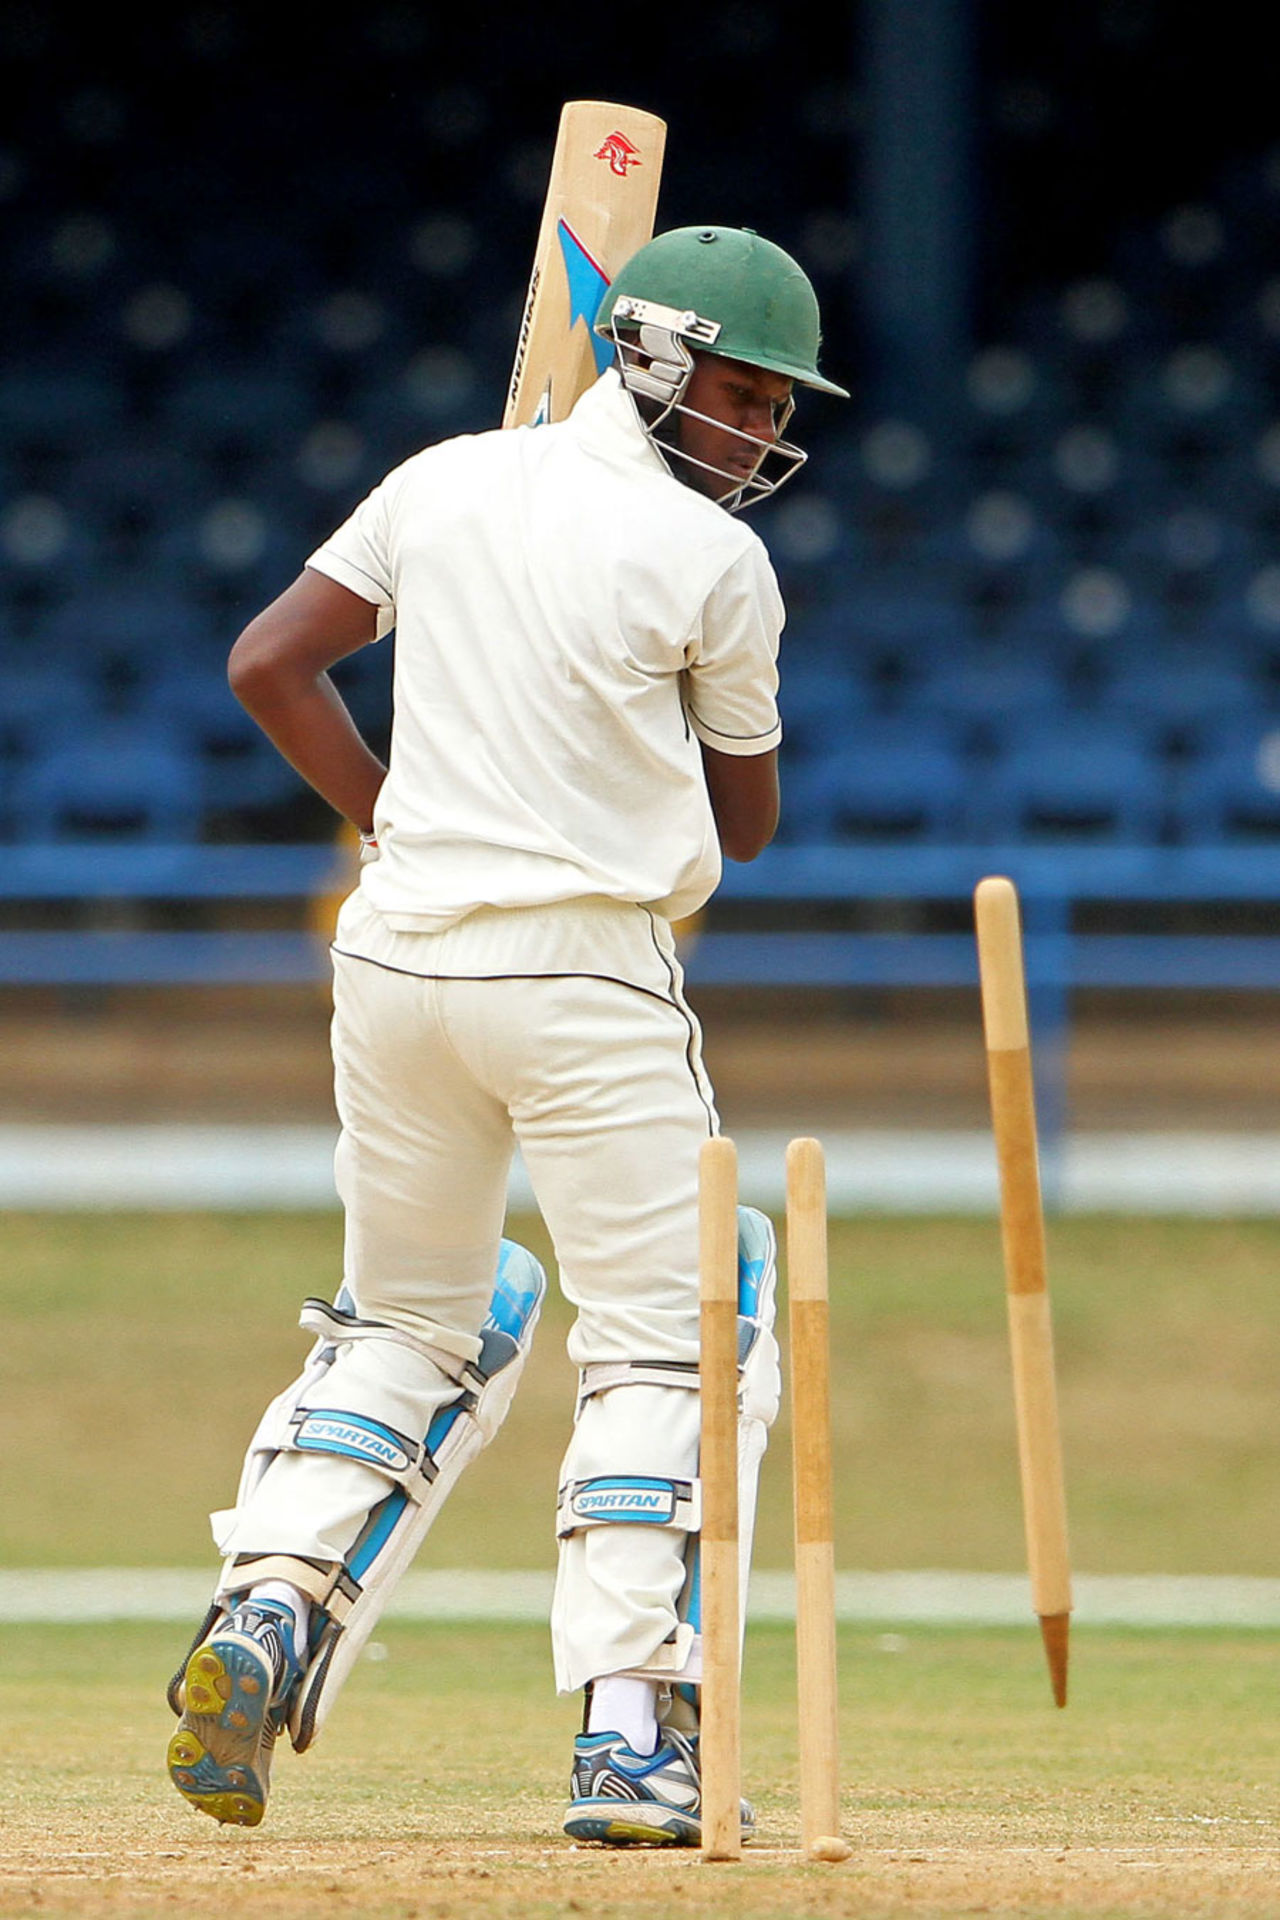 Jermaine Blackwood was bowled by Shannon Gabriel for 9, Trinidad & Tobago v Jamaica, Regional Four Day Competition, 2nd day, Port of Spain, April 5, 2014